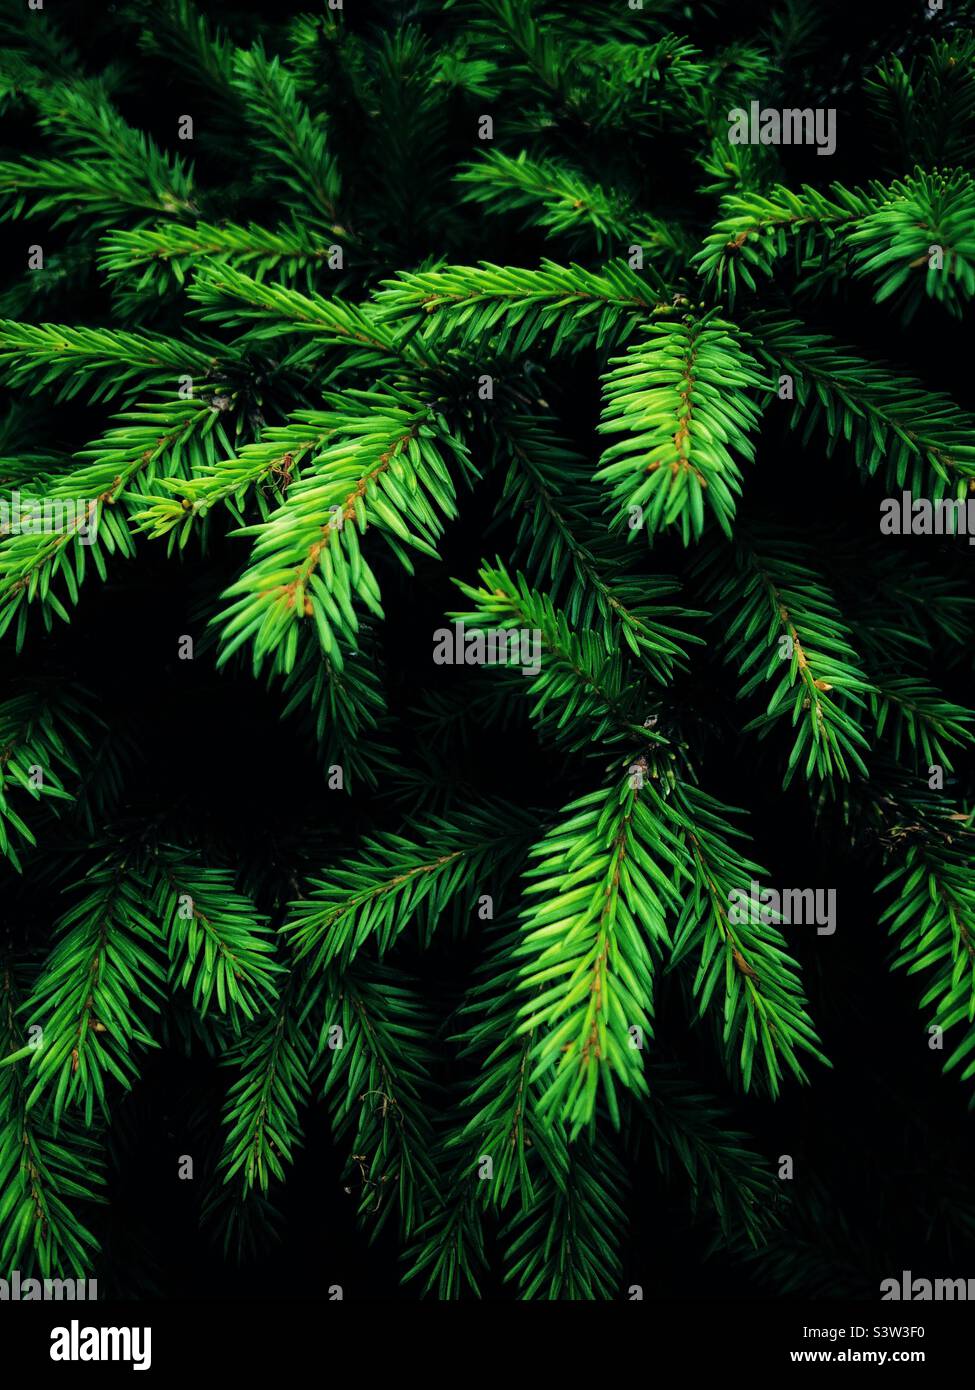 Full frame nature background in a close-up of the lush green leaves and fronds of a Nordic spruce or fir tree with coffee space Stock Photo